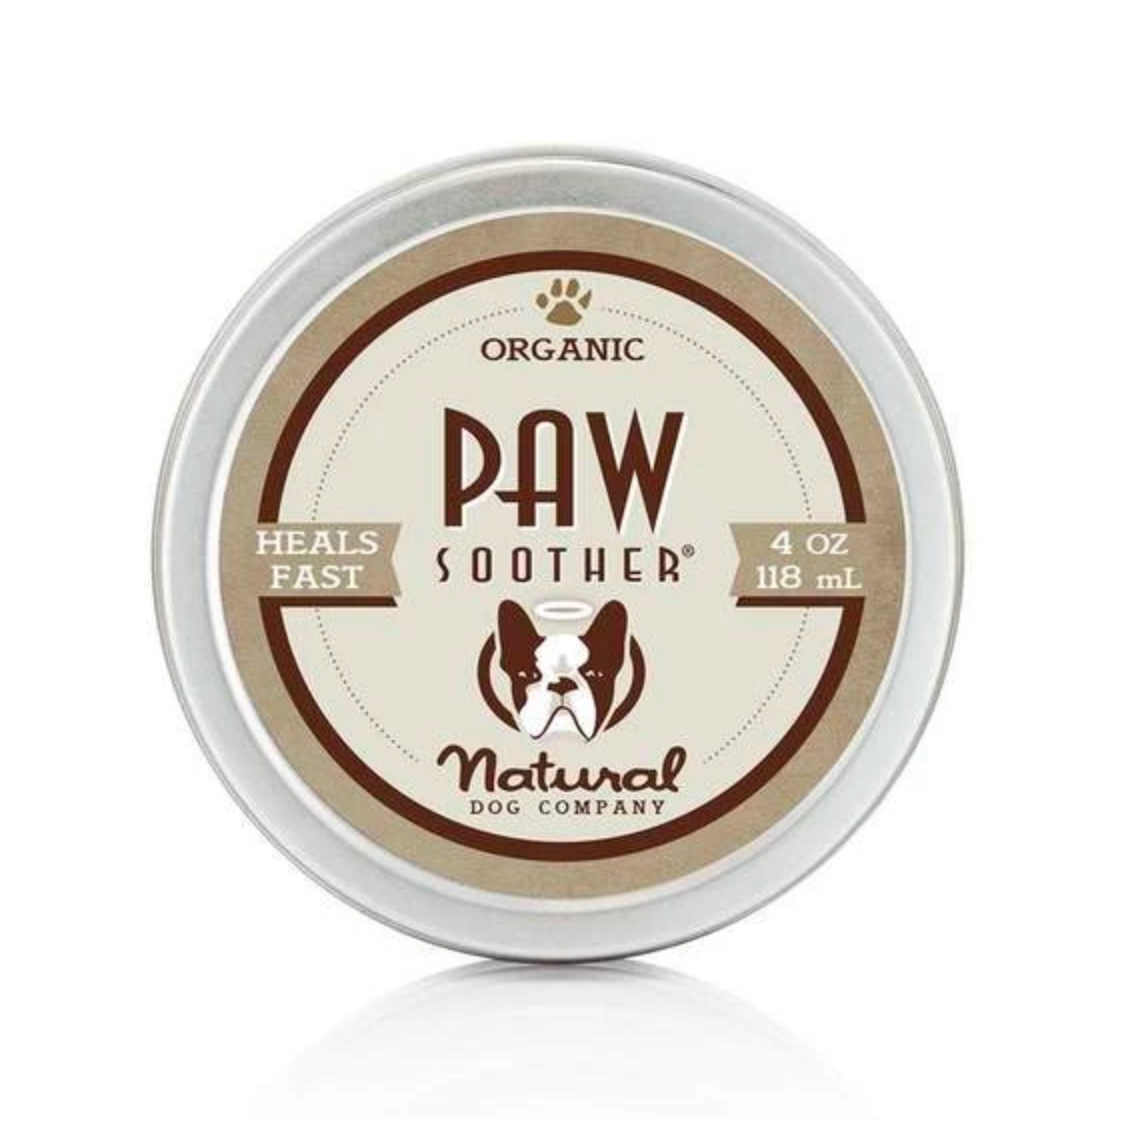 Paw Soother Tin